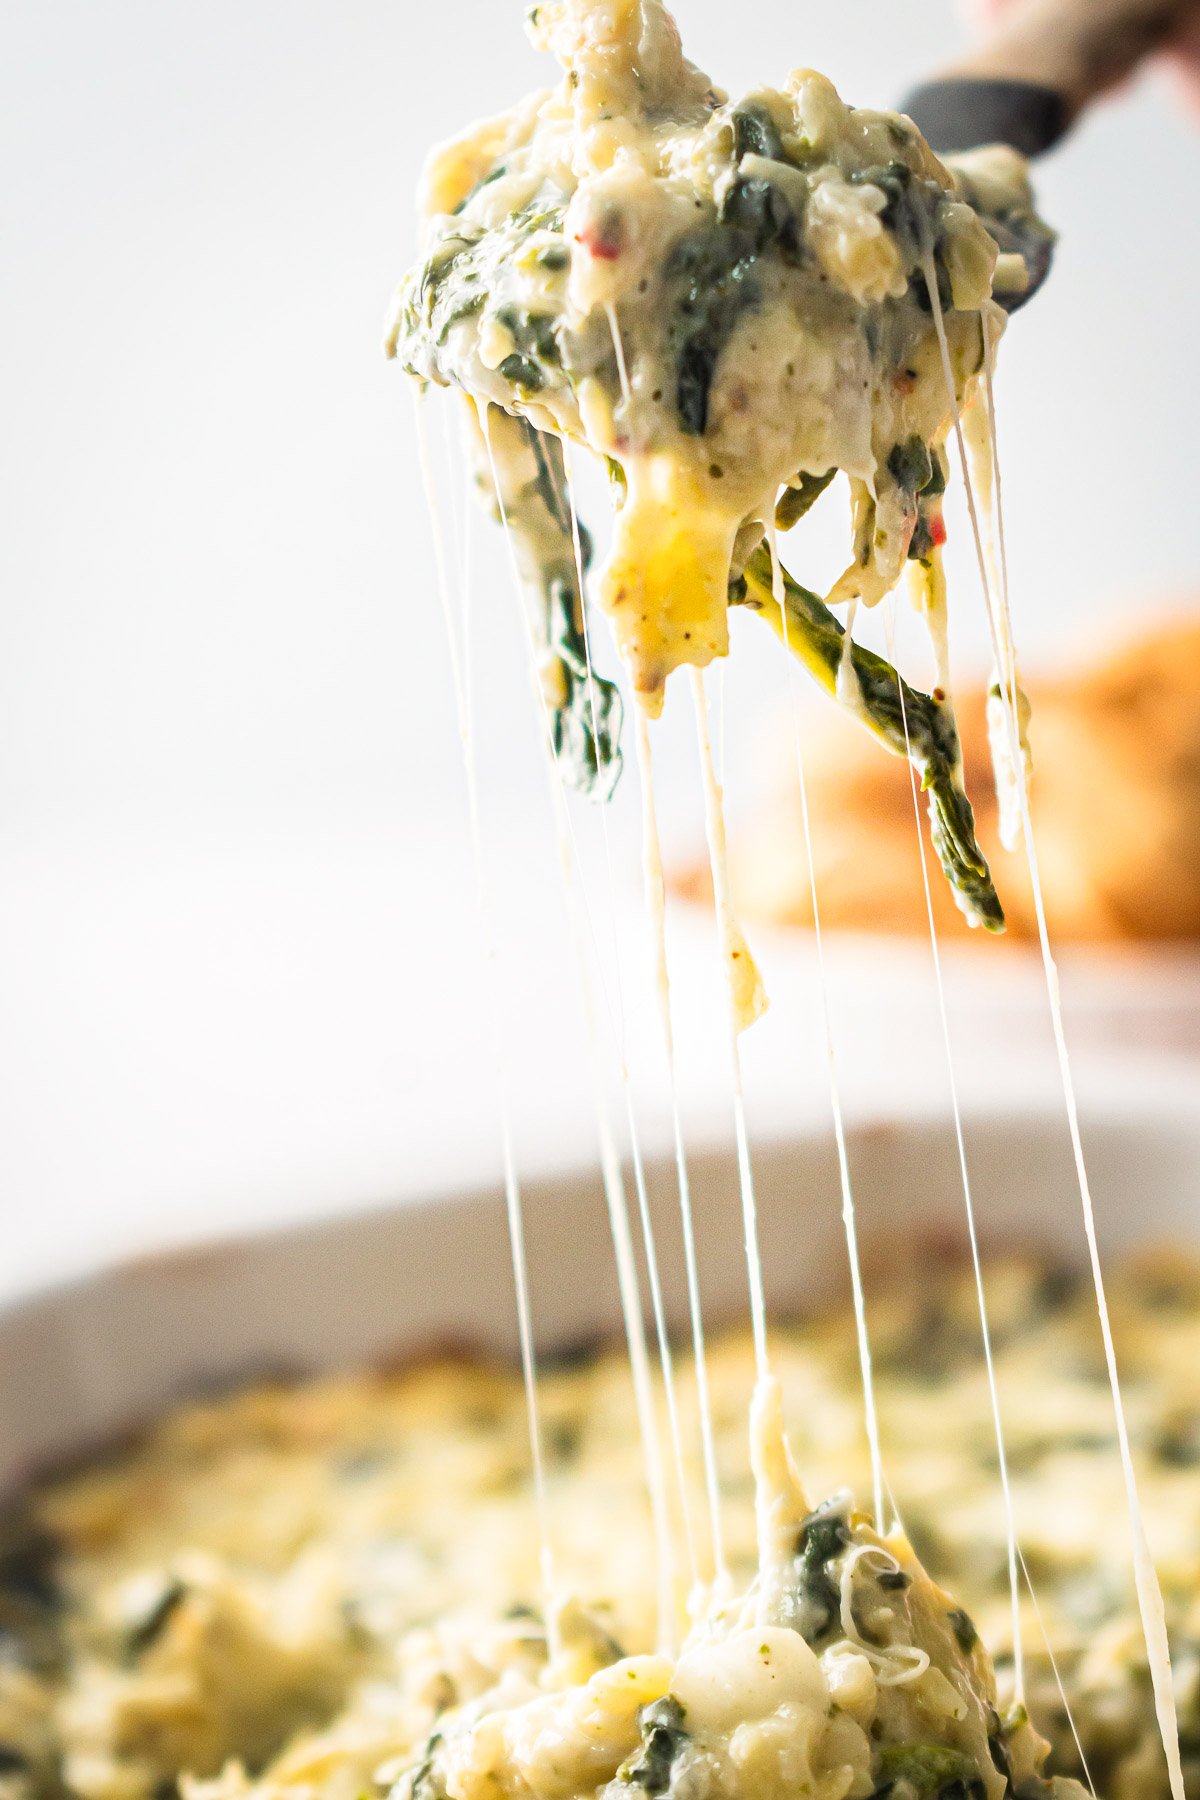 Oven baked healthy spinach artichoke dip on a spoon.